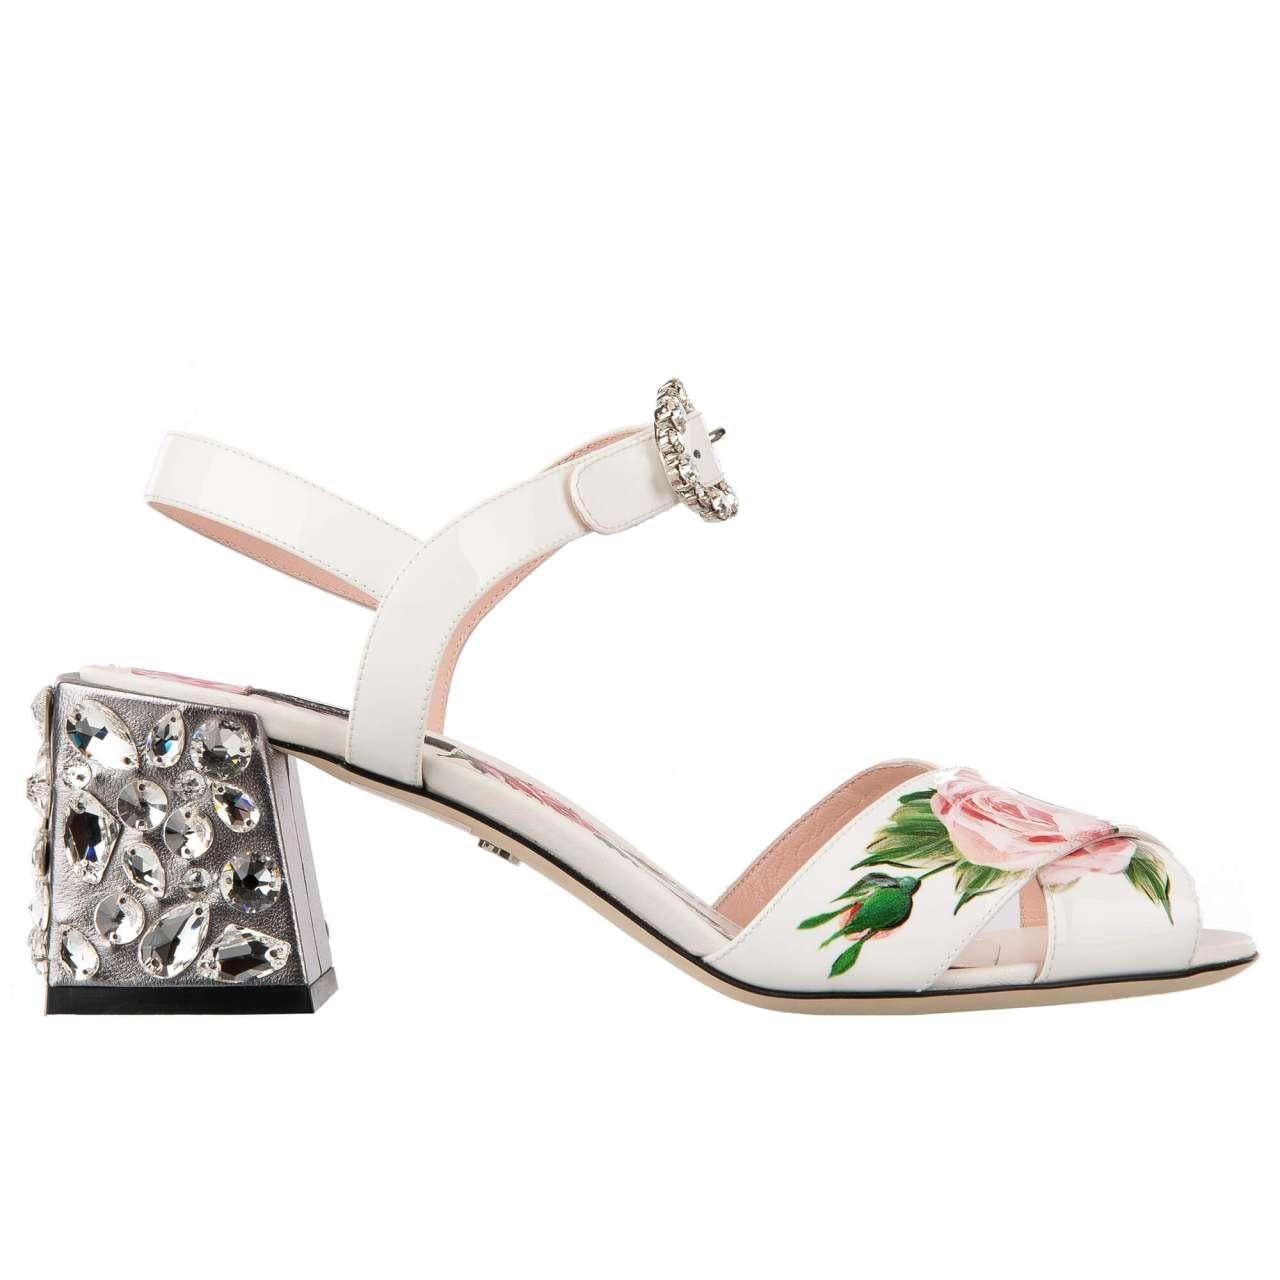 D&G Patent Leather Rose Pumps Sandals KEIRA with Crystal Heel White Silver 36 For Sale 3